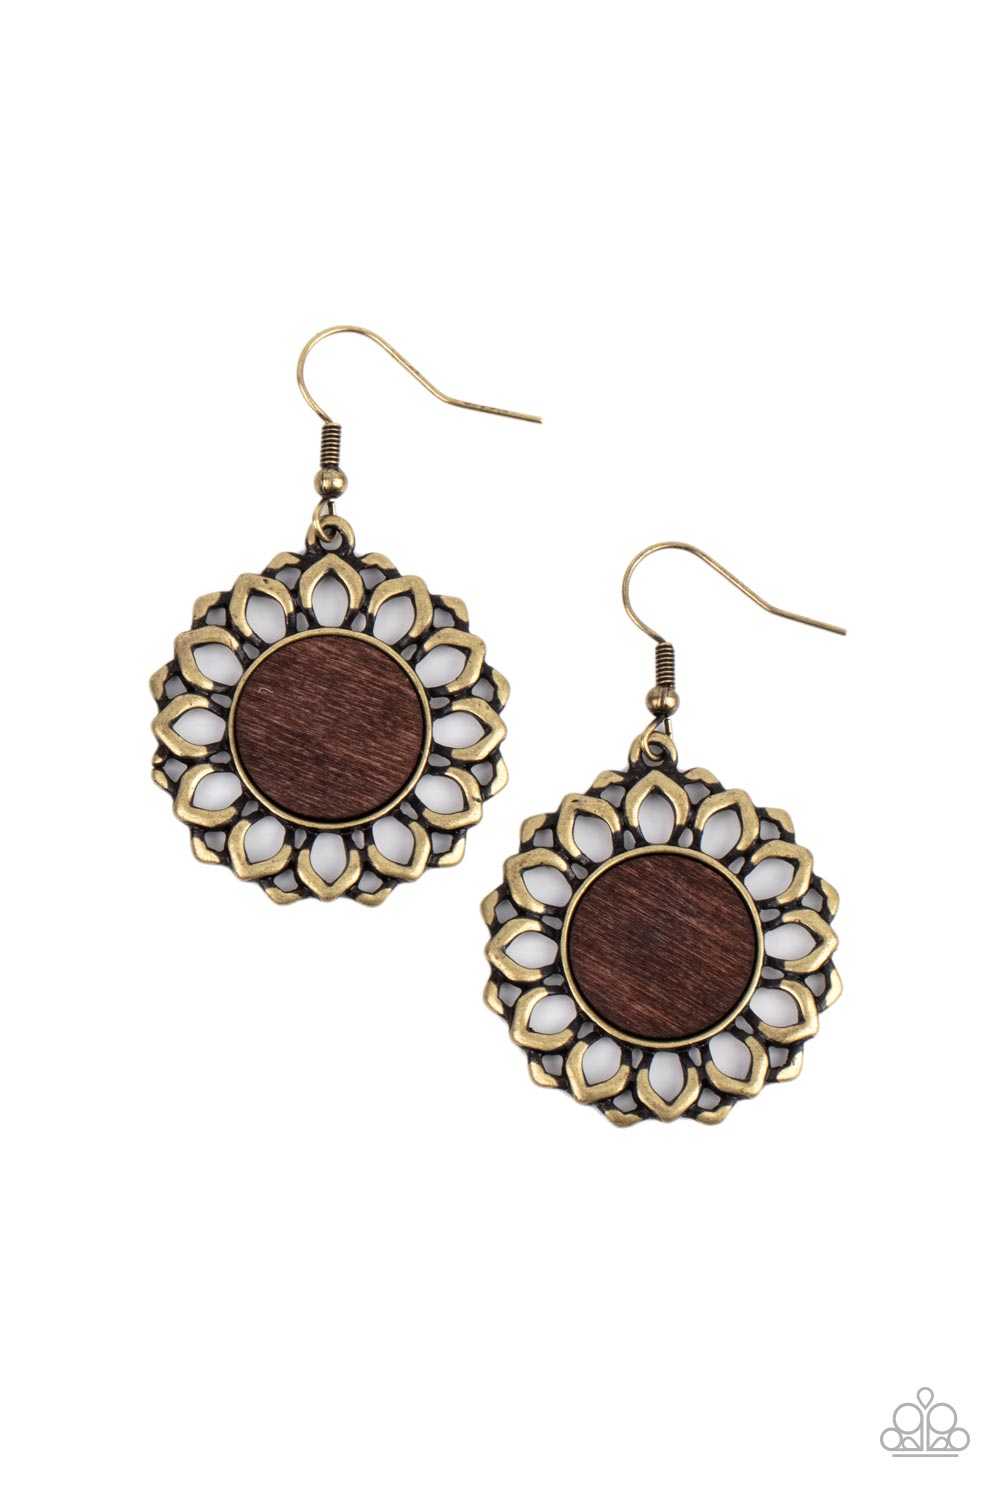 Farmhouse Fashionista Brass Earring - Paparazzi Accessories  Layers of antiqued brass petals bloom from a flat brown wooden center, creating a whimsically rustic display. Earring attaches to a standard fishhook fitting.  Sold as one pair of earrings.